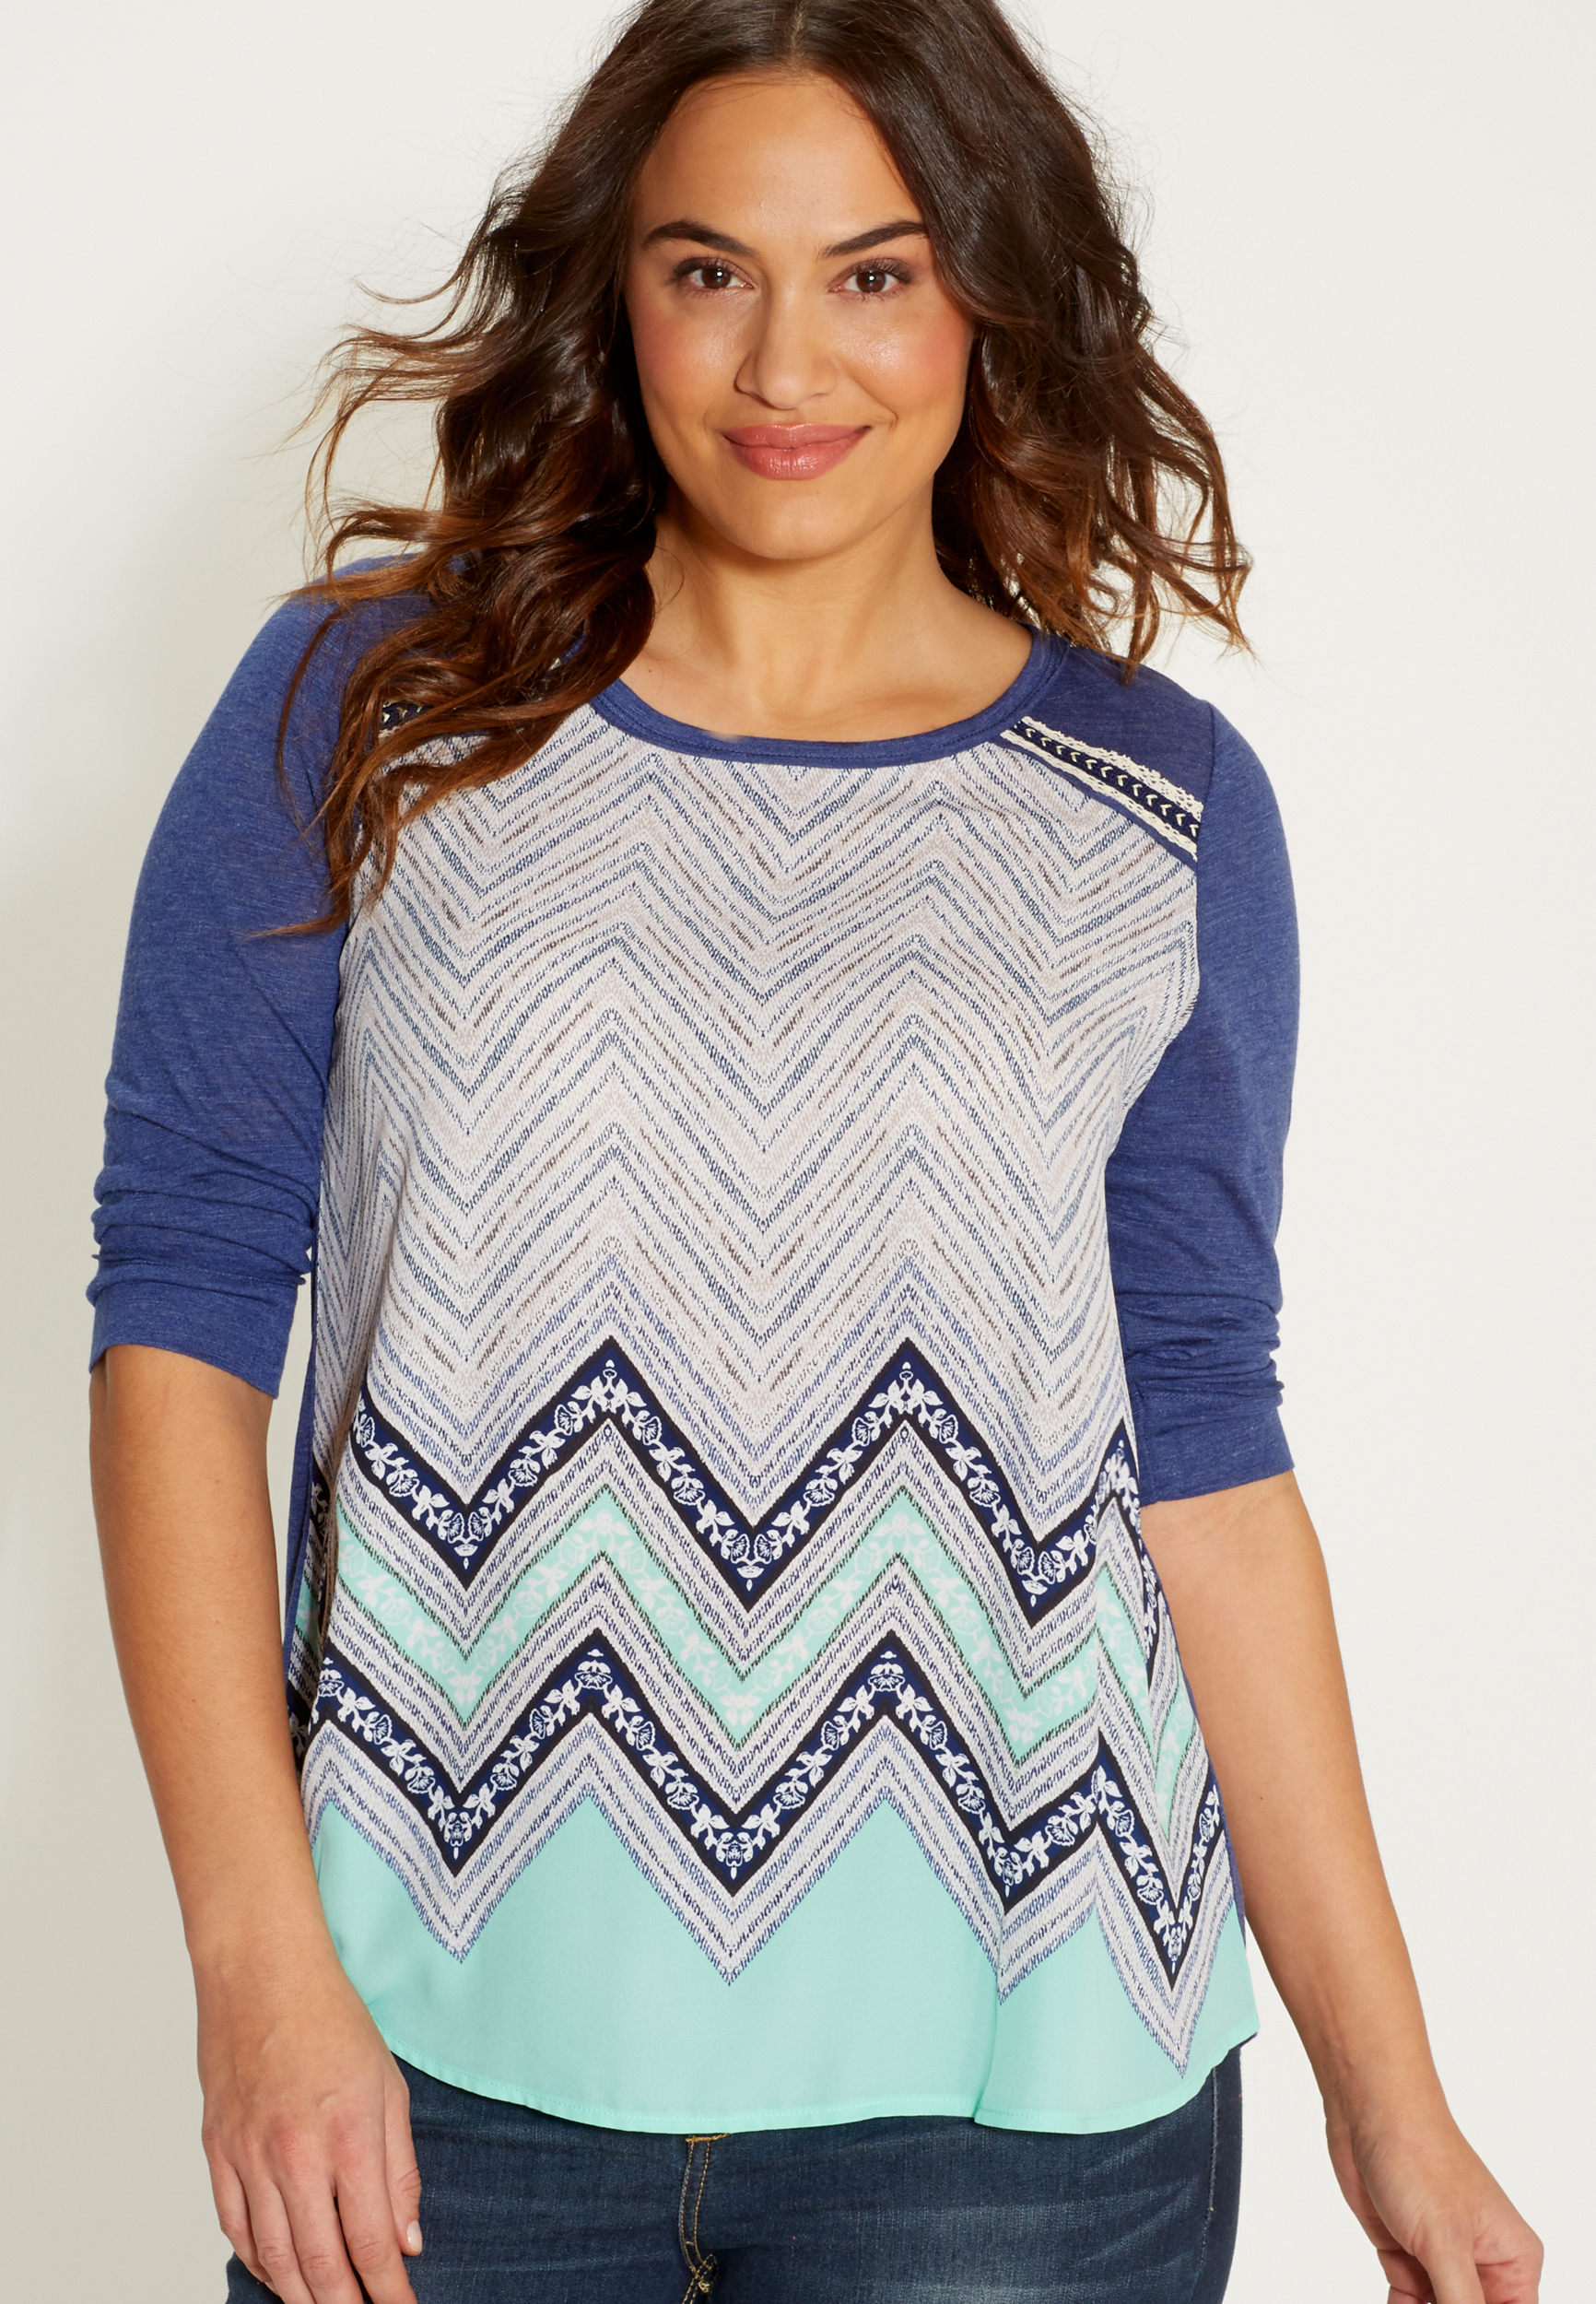 plus size button back tee with chevron print chiffon front | maurices